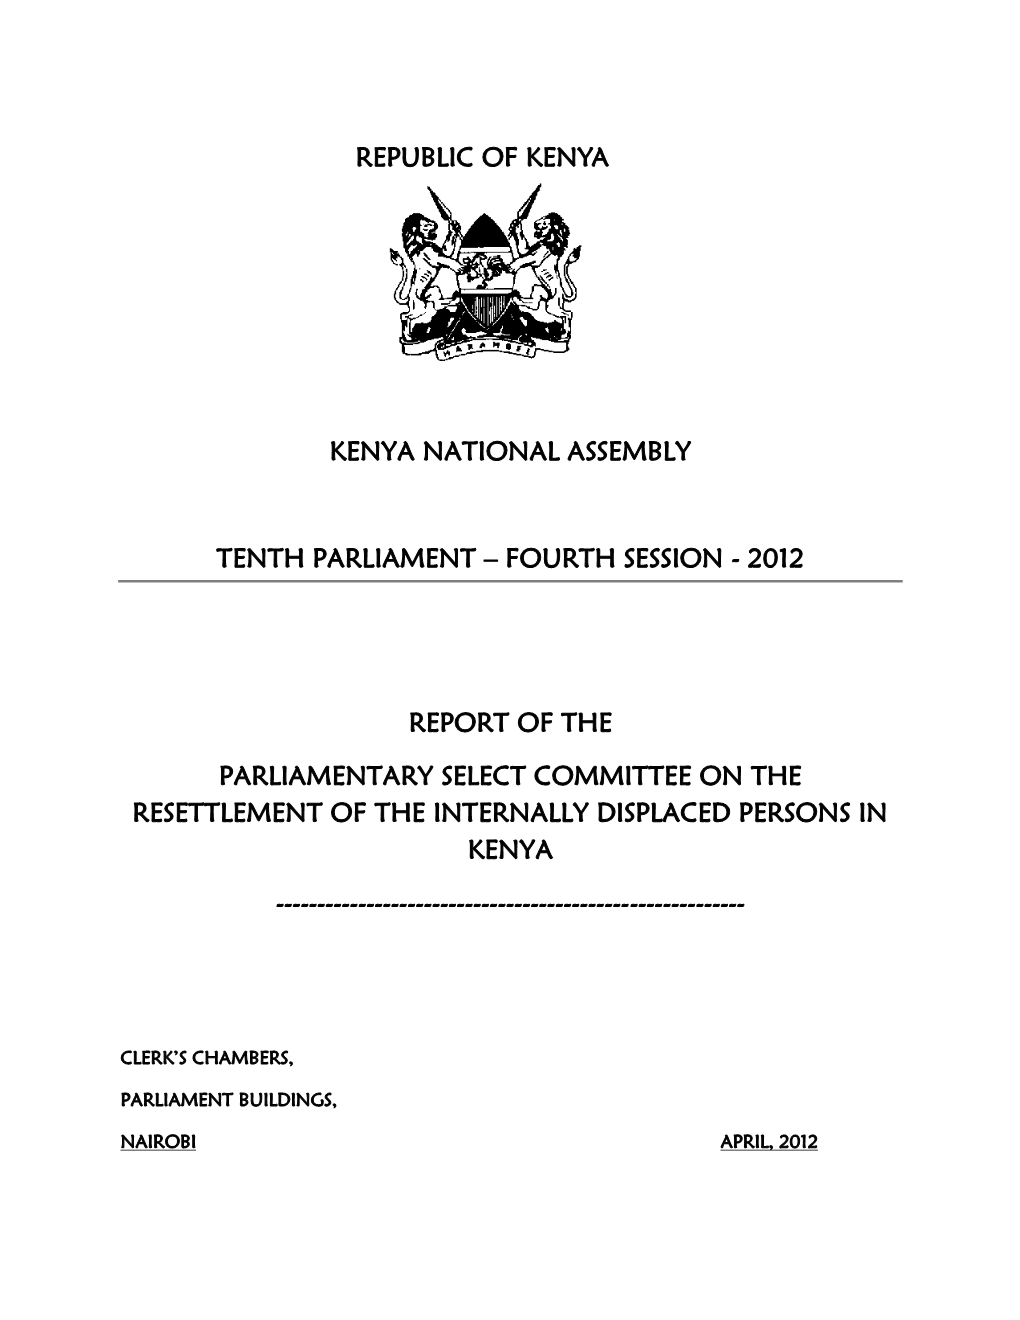 2012 Report of the Parliamentary Select